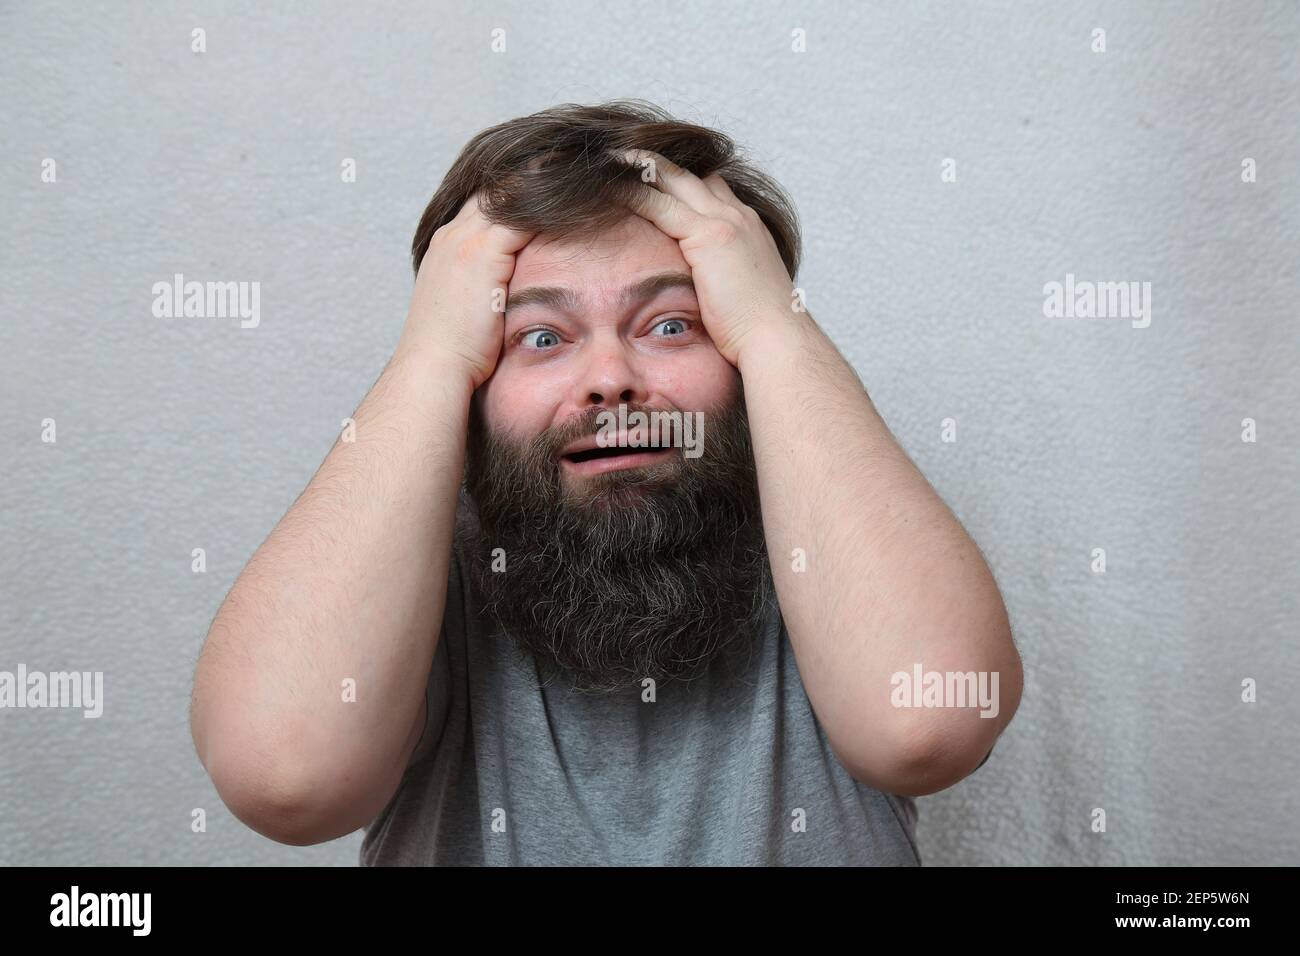 A man with a beard in a tantrum Facial expression of panic, fear, failure Concept: business collapse, bankruptcy, stress, defeat. Humor, a joke. Stock Photo